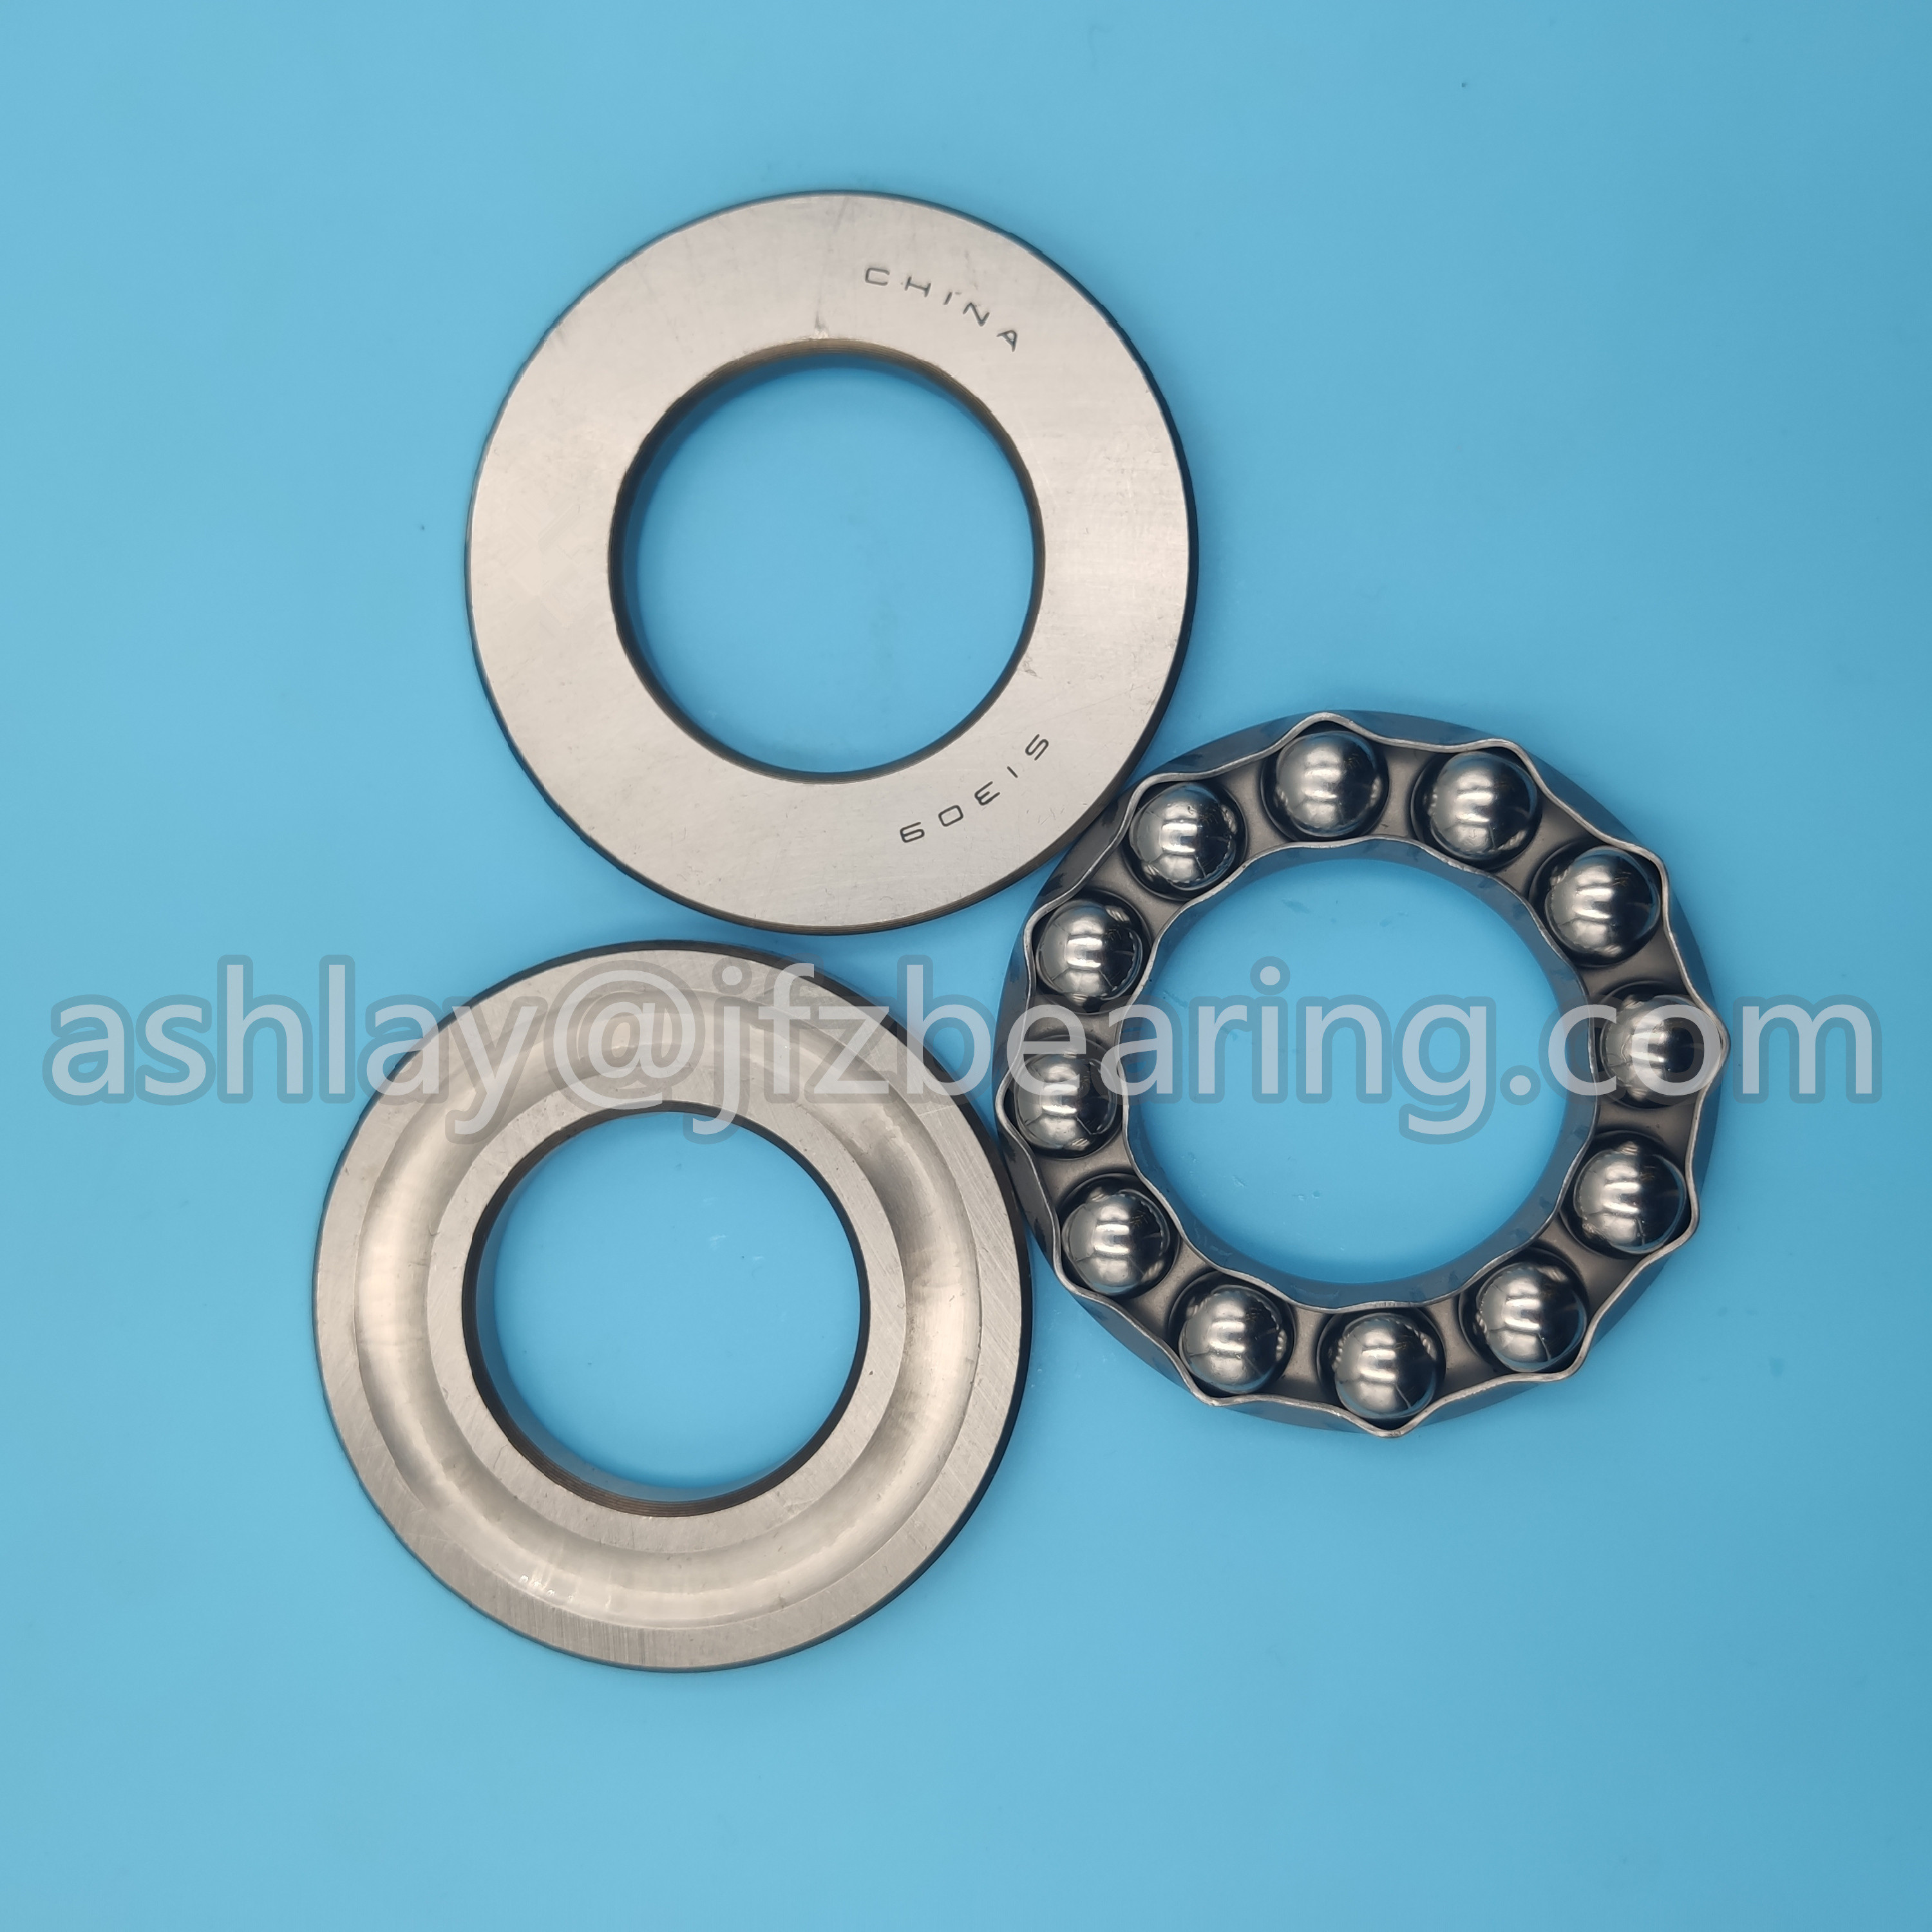 Quality JFZ BEARING 51309 Ball Thrust Bearing - Single-Direction, 45 mm Bore, 85 mm OD, 28 mm Width, Separable, JFZ Brand for sale